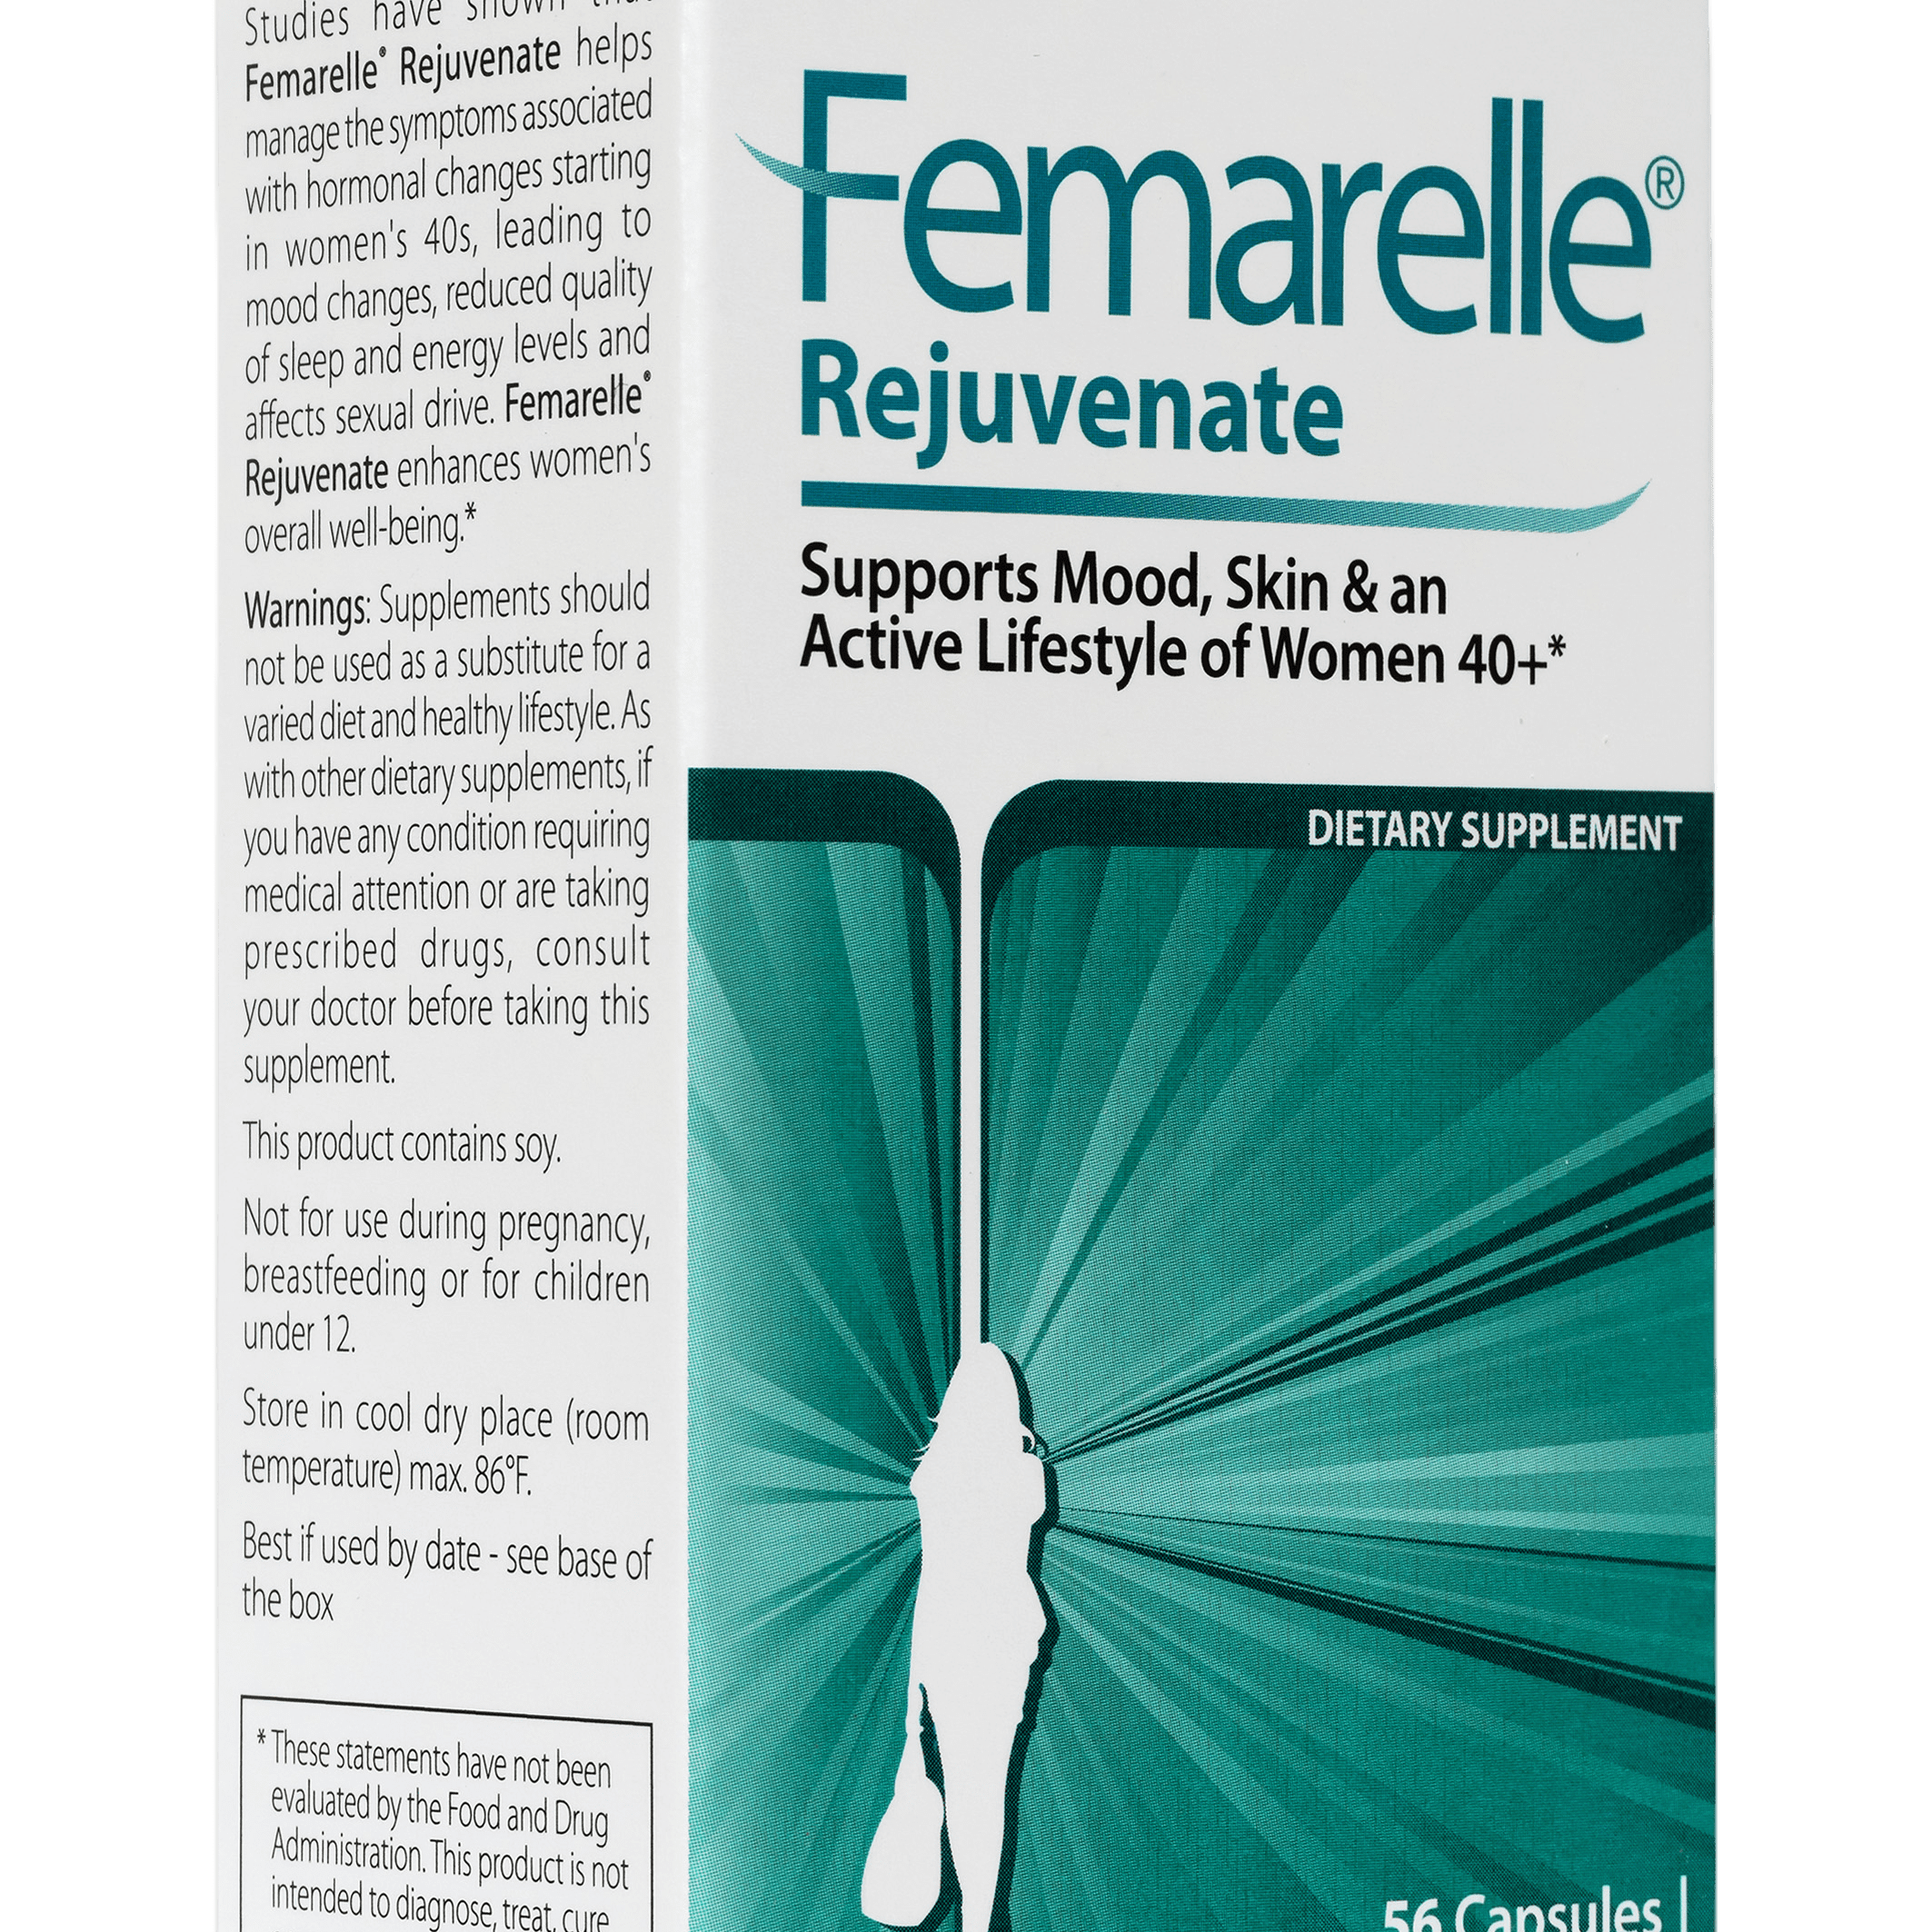 Femarelle Rejuvenate supports mood, skin and active lifestyle 